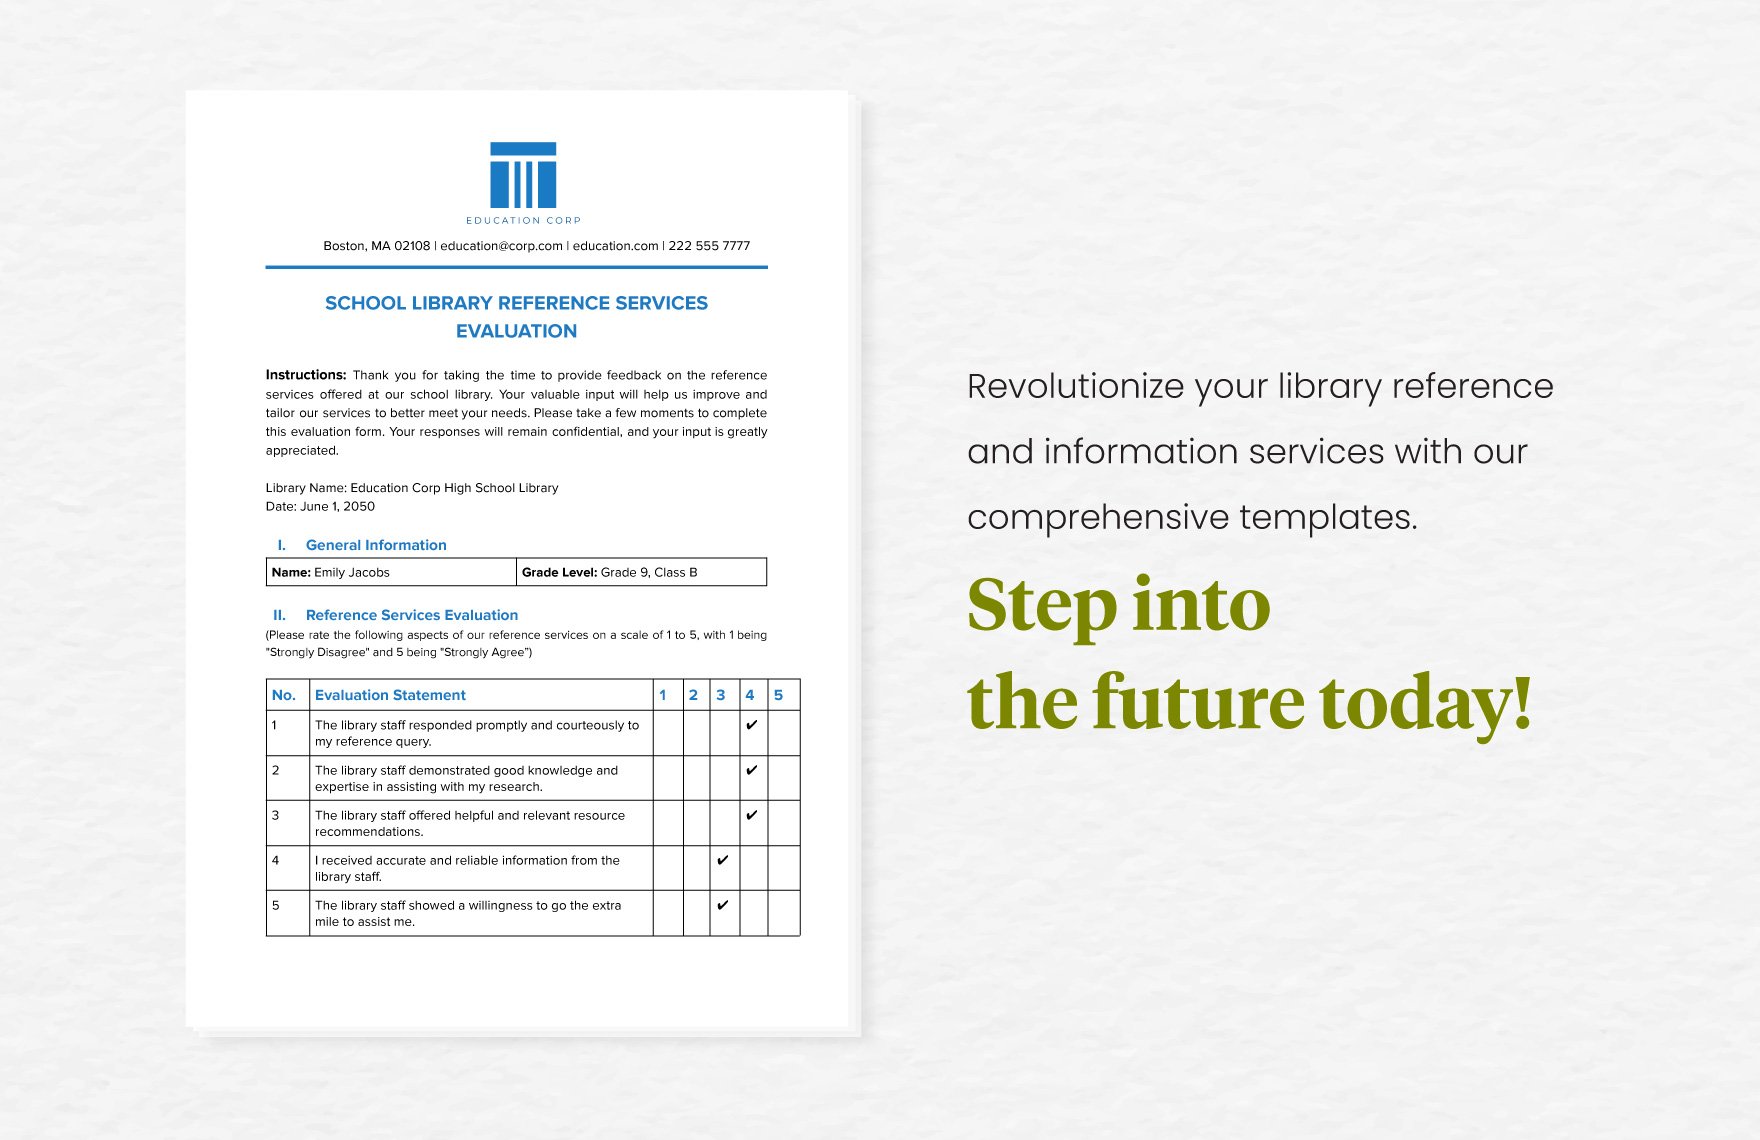 School Library Reference Services Evaluation Form Template